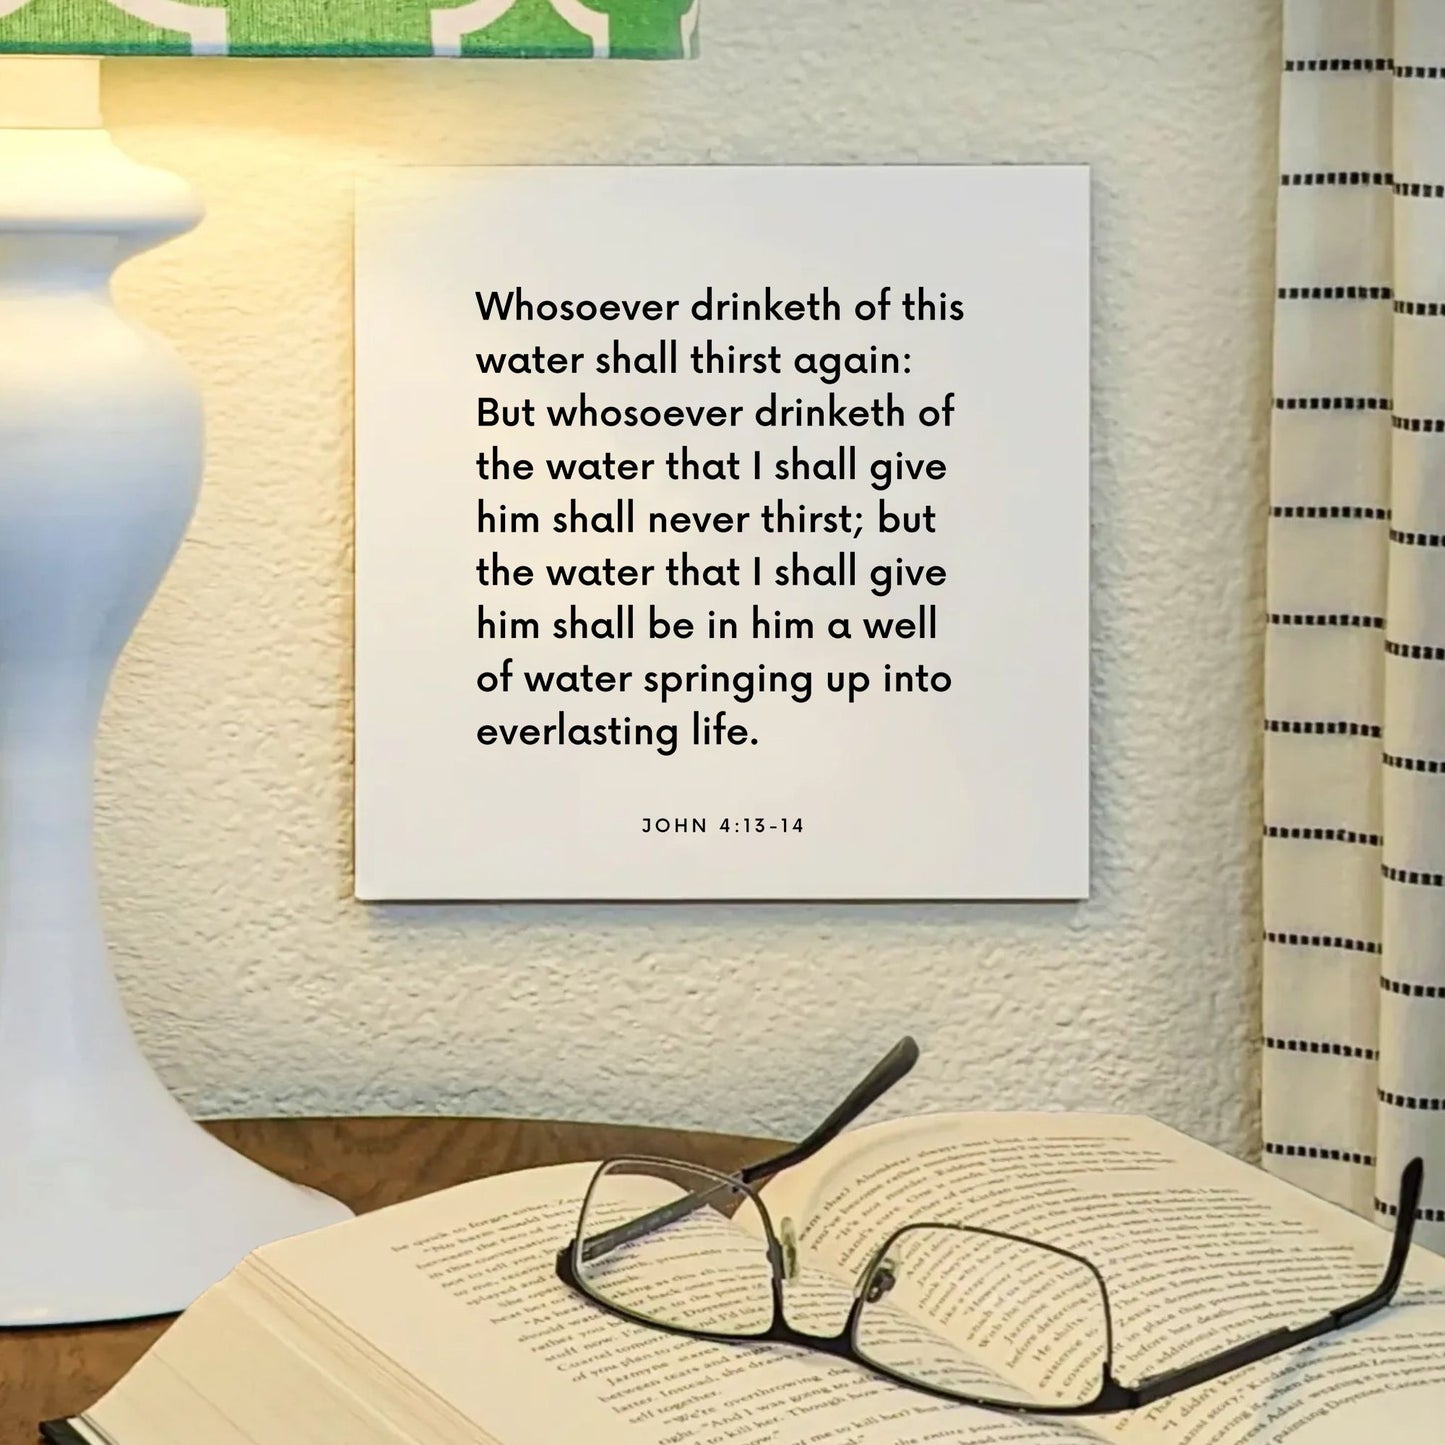 Lamp mouting of the scripture tile for John 4:13-14 - "Whosoever drinketh of this water shall thirst again"